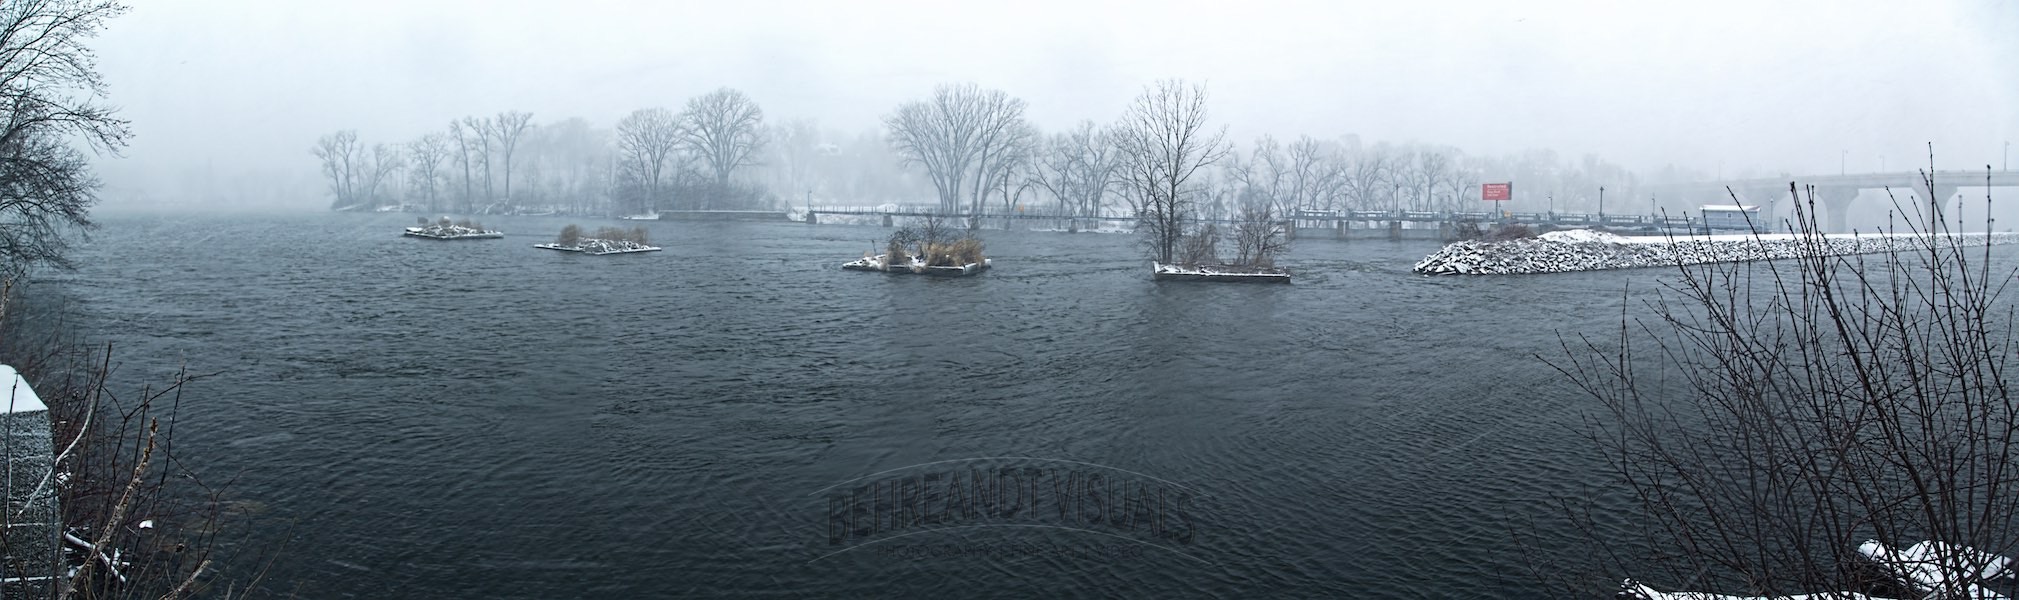 Panoramic view of the Fox River in Appleton, Wisconsin during a snow storm.